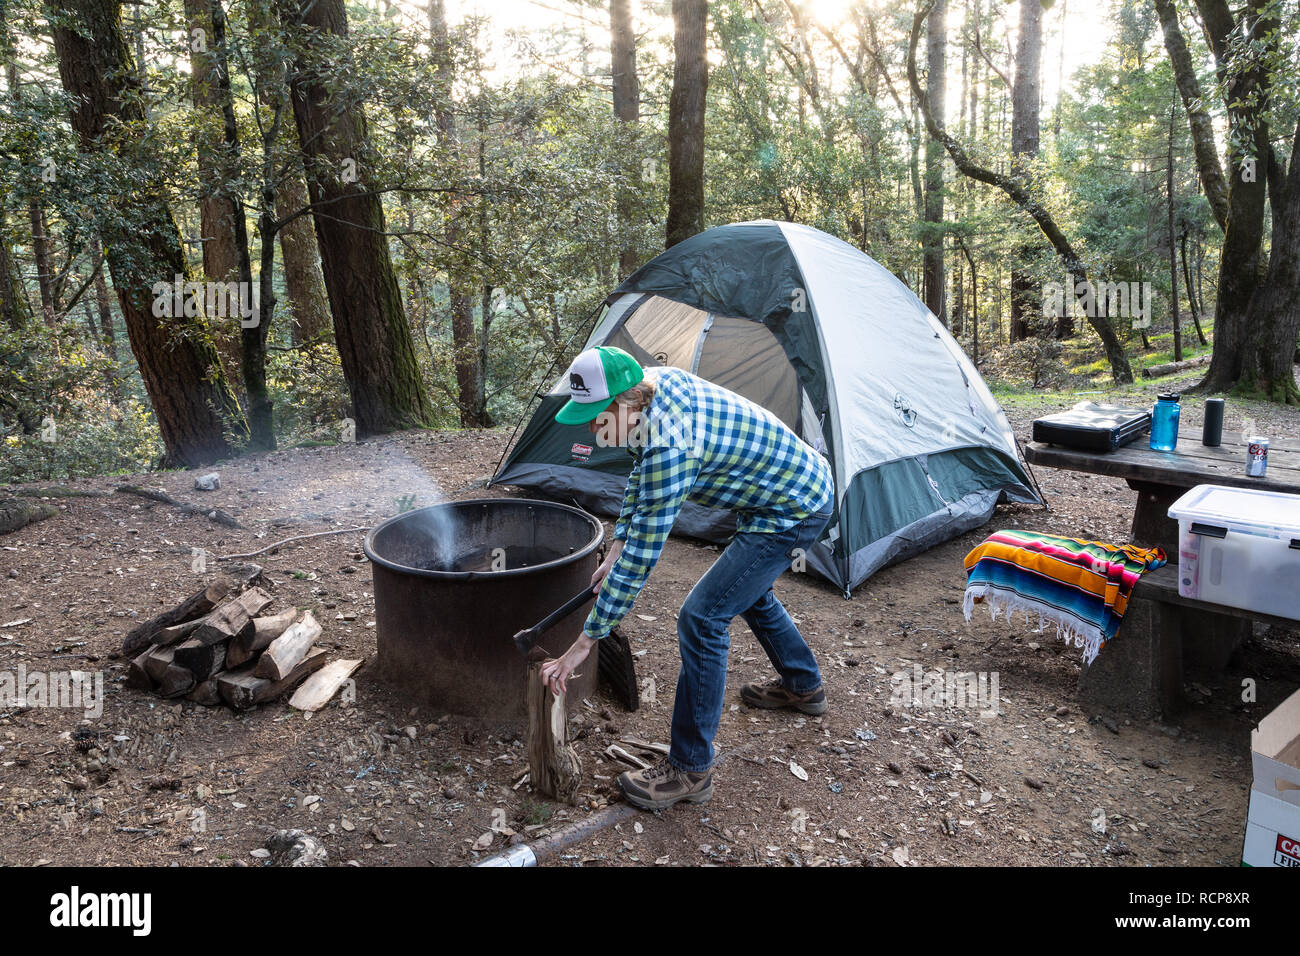 A camper splits kindling to start a camp fire at Pantoll Campground in Mount Tamalpais State Park, California. Stock Photo